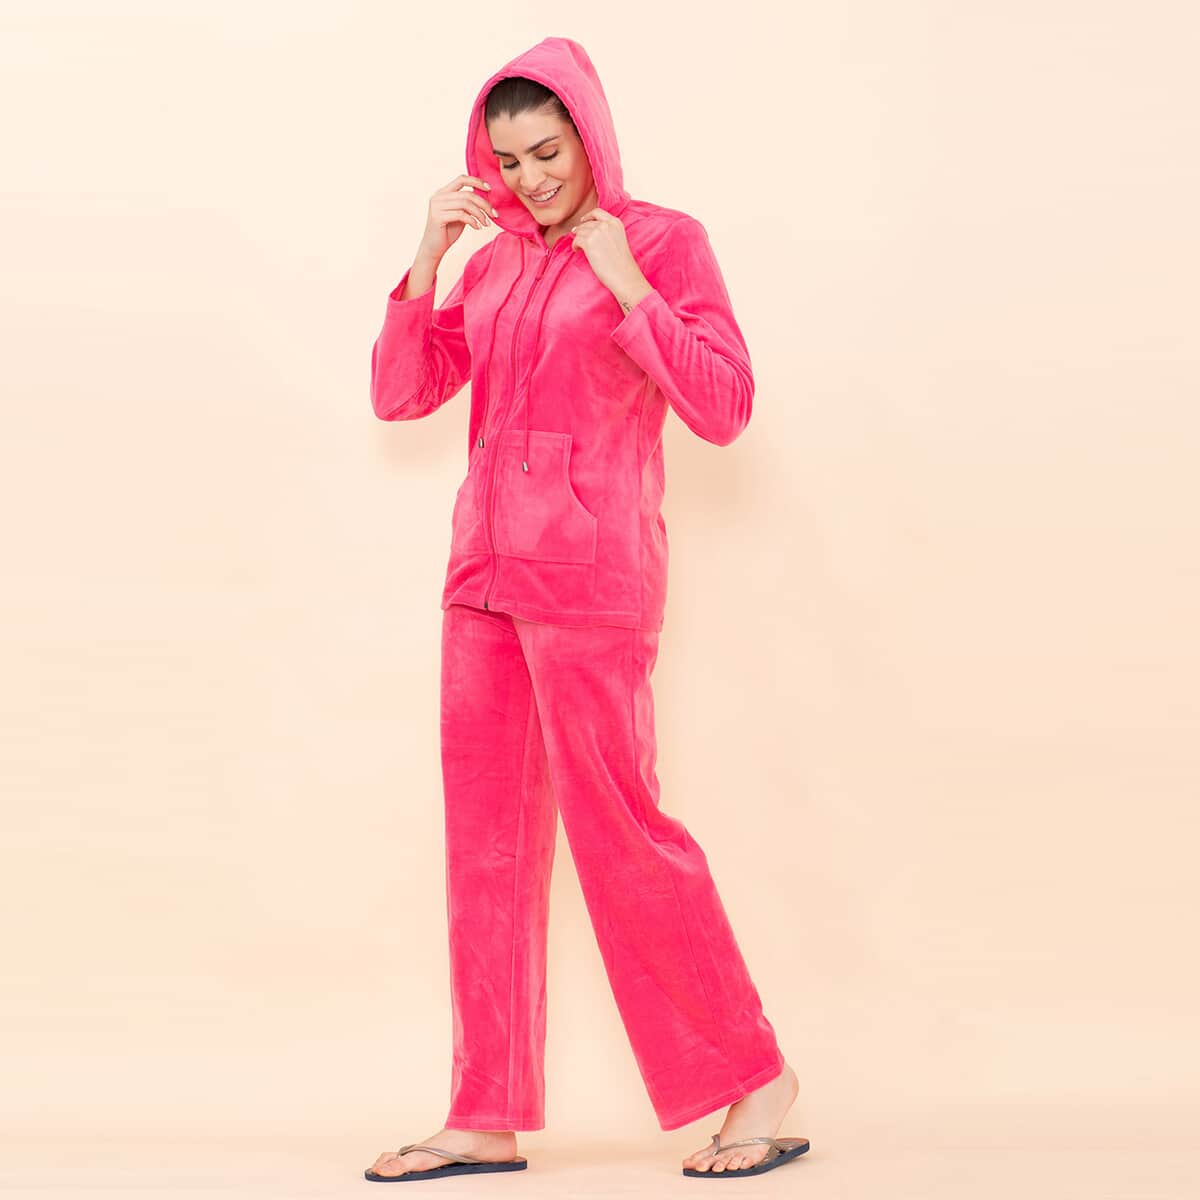 Tamsy LUX Pink Velour Track Suit Set - L image number 4